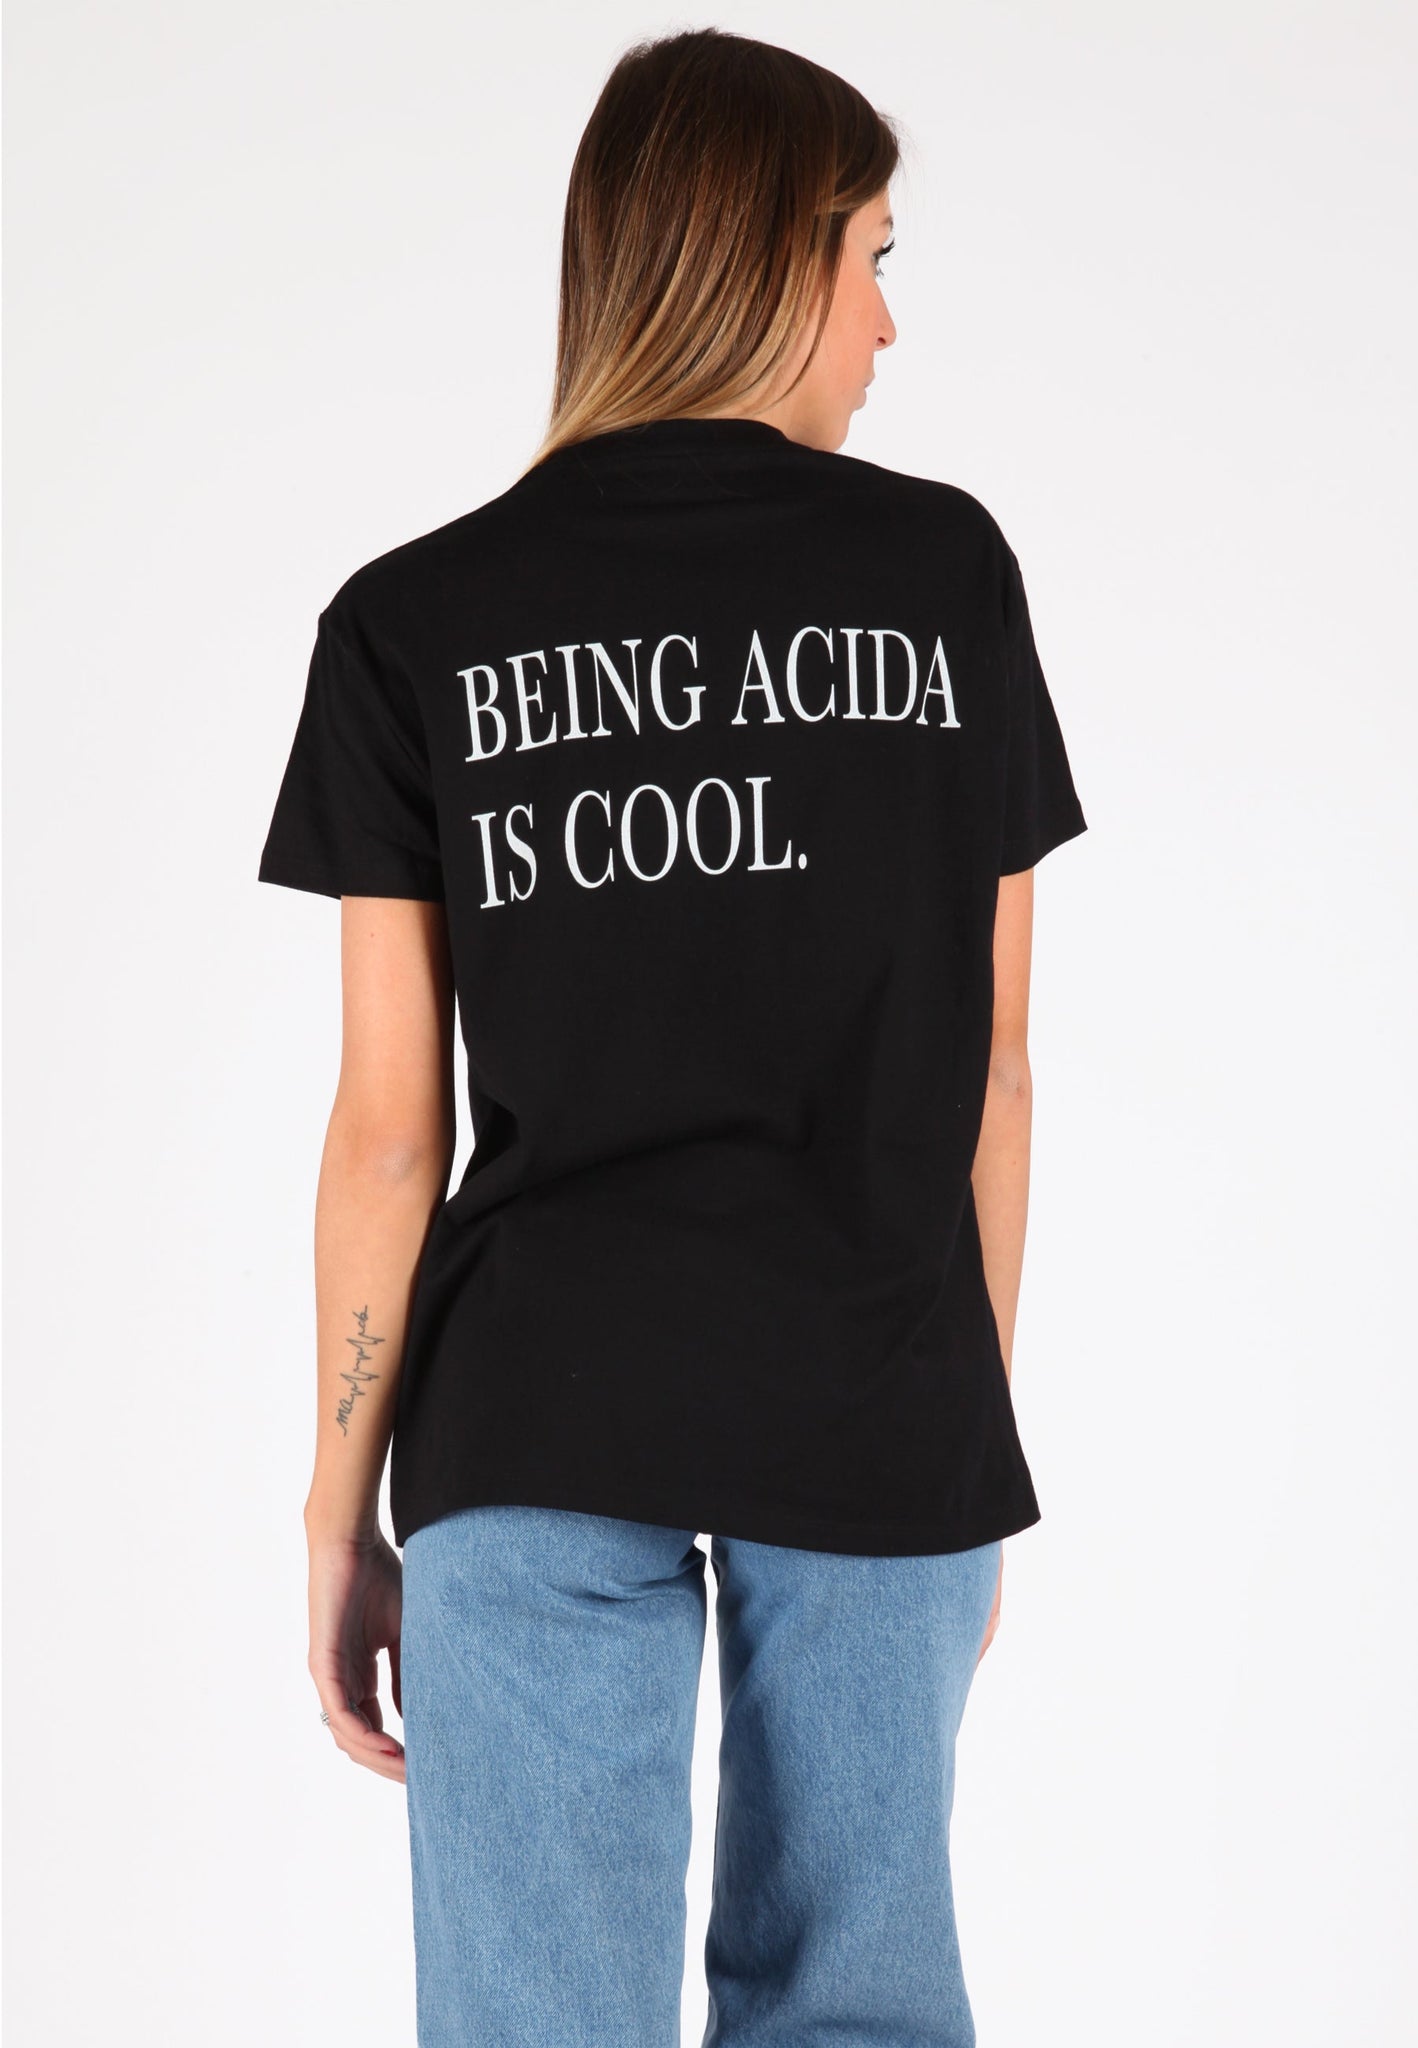 T-Shirt  "Being acida is cool"